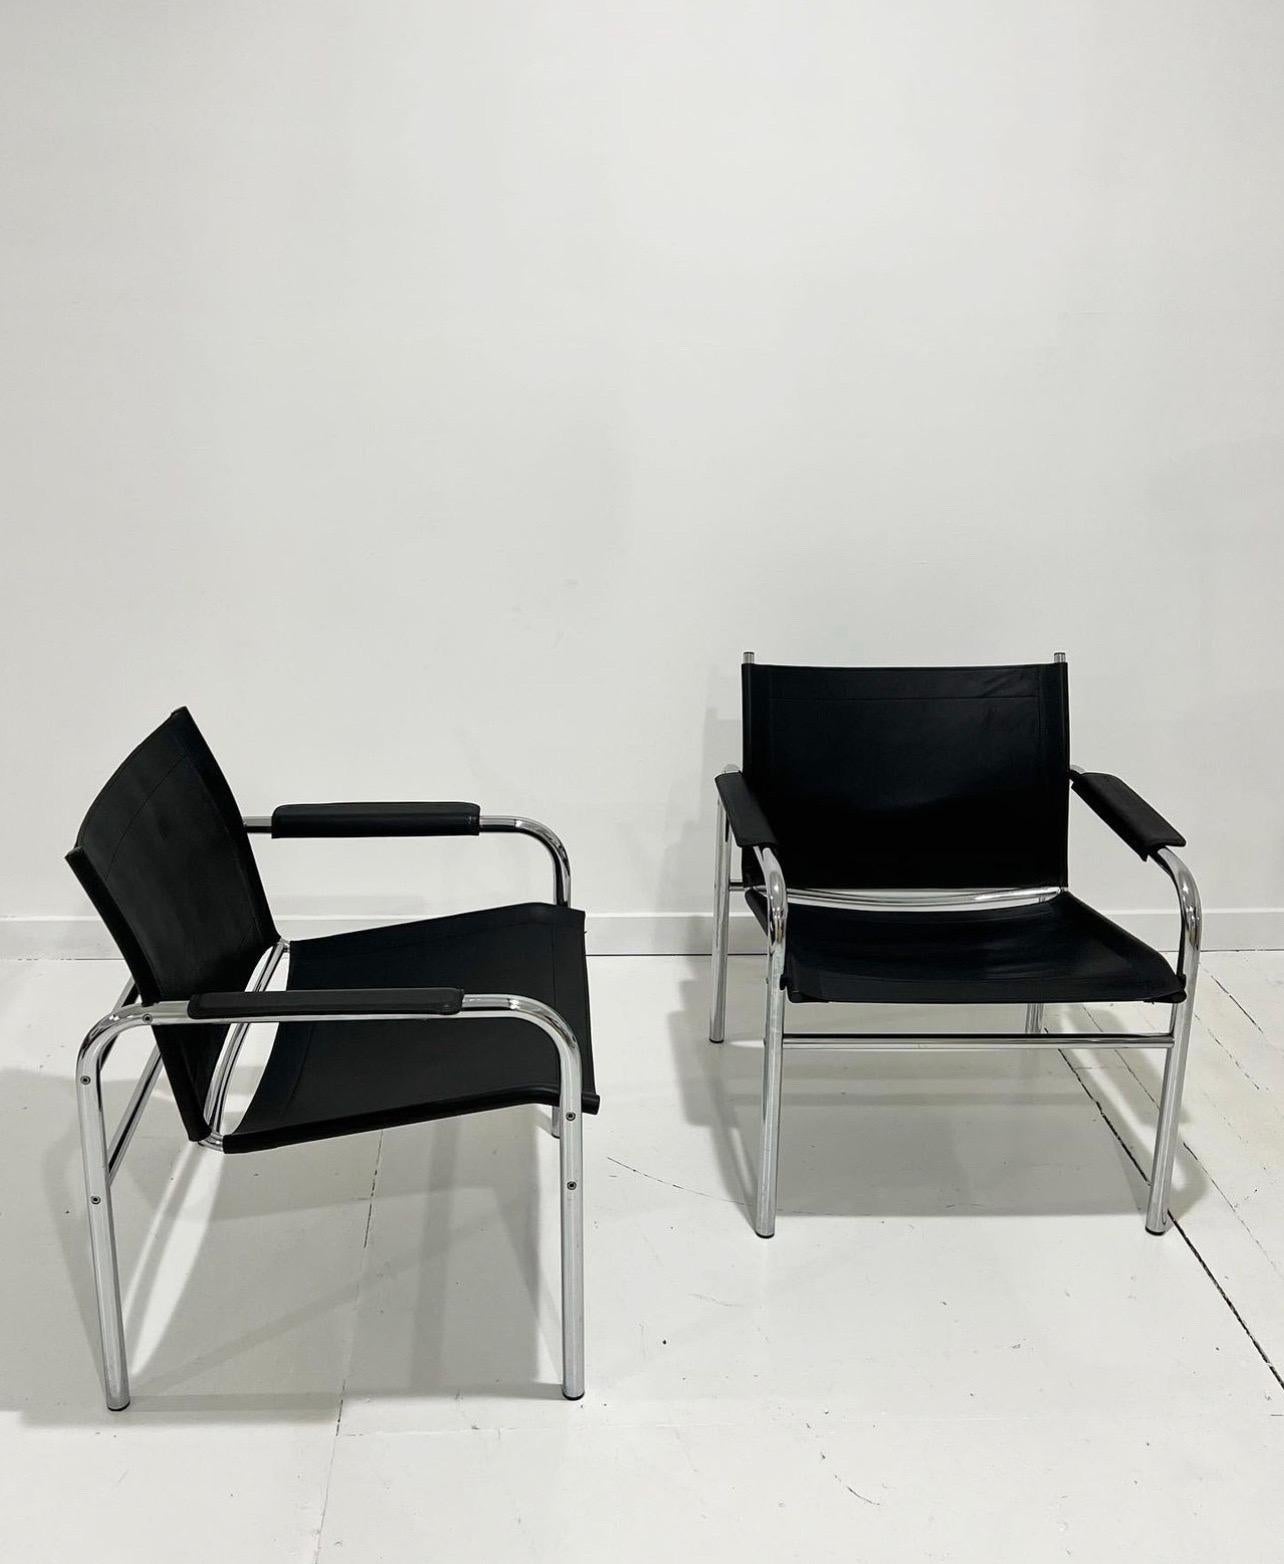 Made by Ikea in the 1980s and designed by Tord Bjorklund. Many great designs for Ikea from the 1980s are from his hands. These lounge chairs are in excellent condition and show minimal signs of use. Leather is very healthy and presents no cracks or